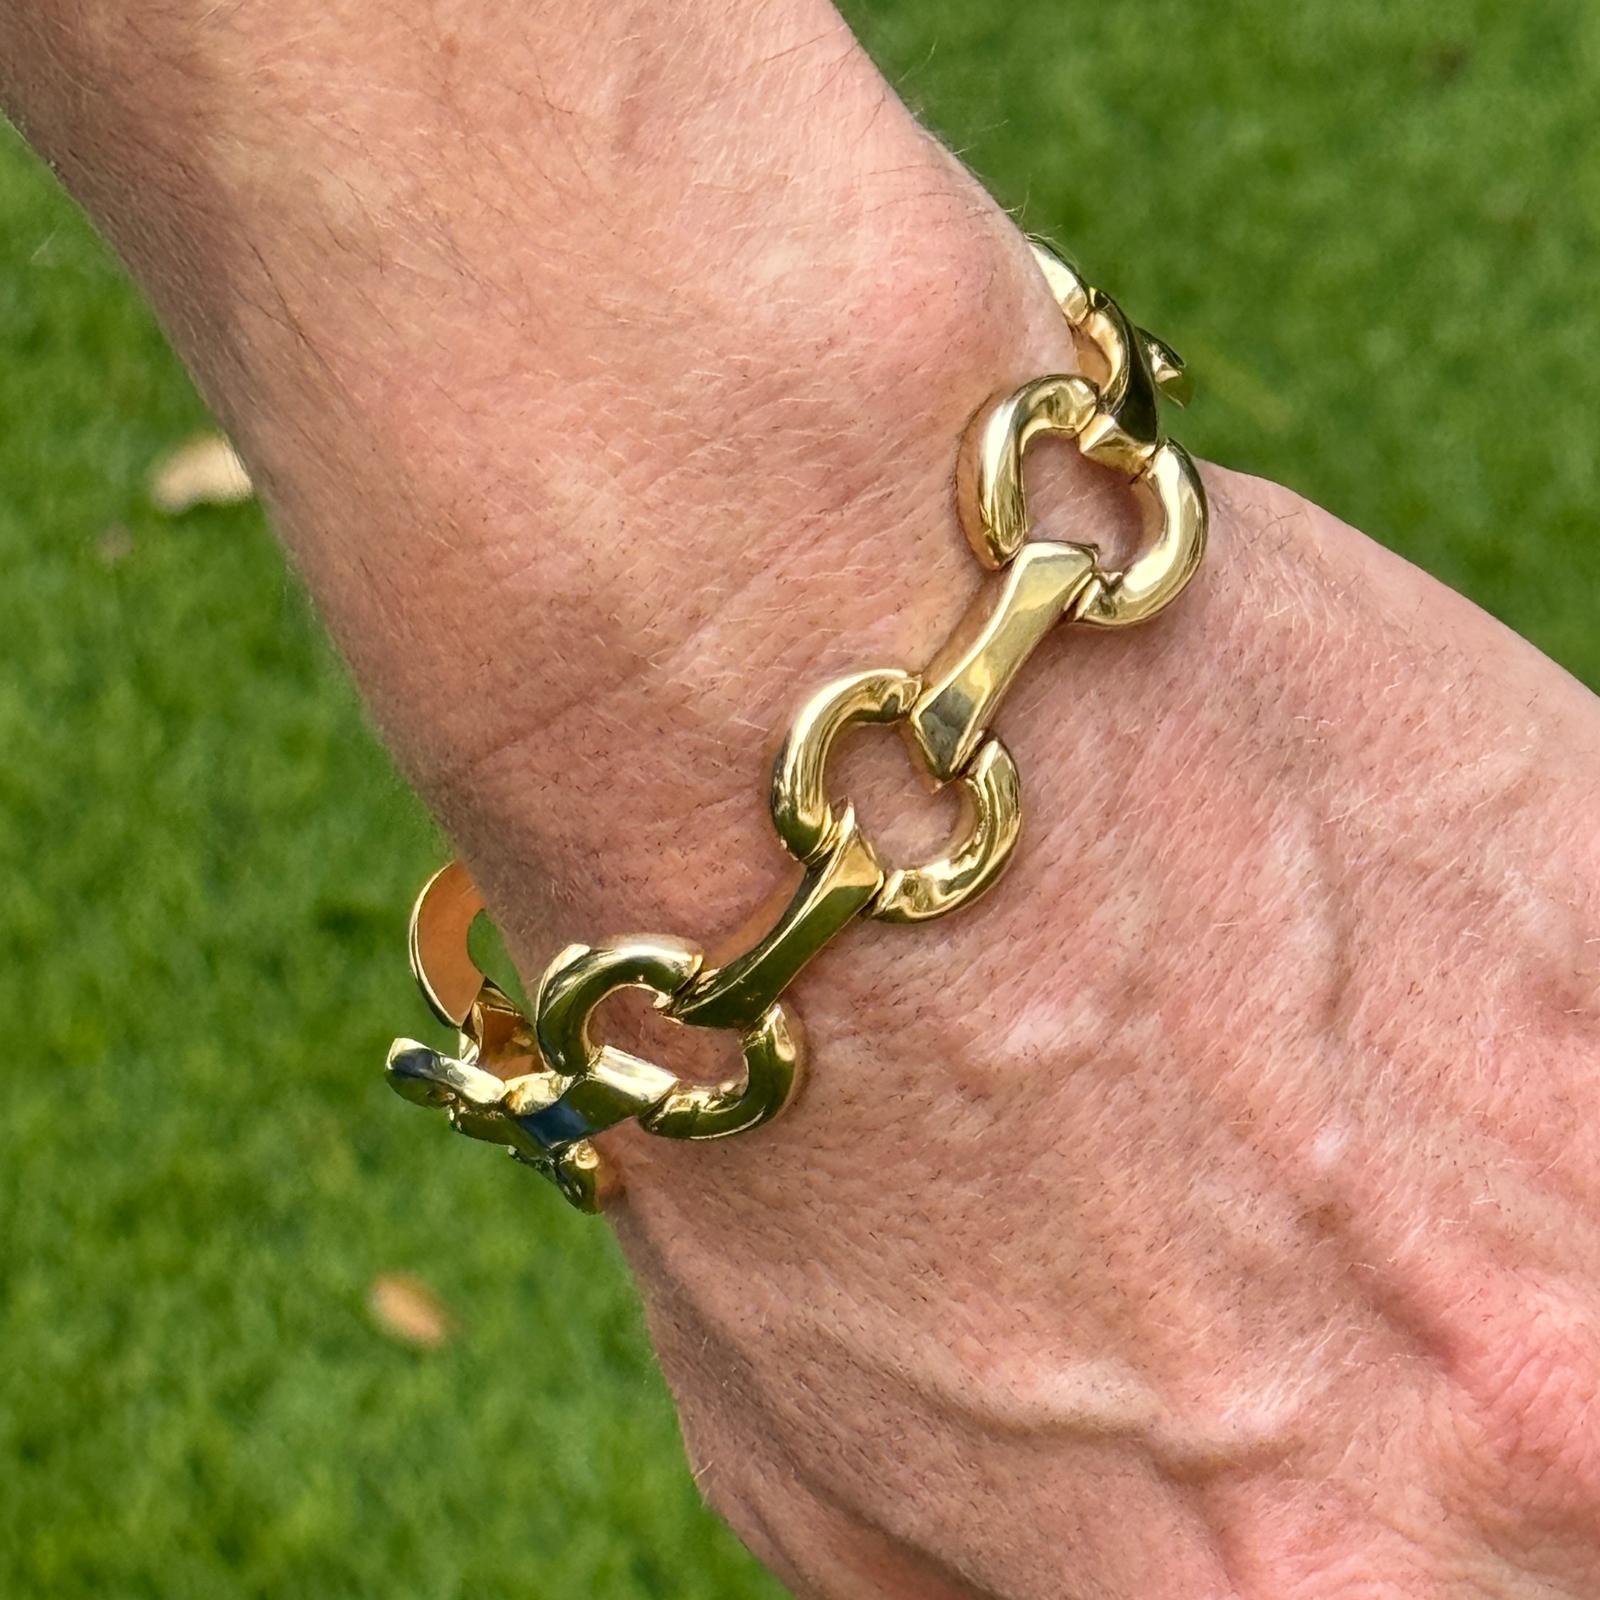 Modern stirrup link bracelet crafted in 14 karat yellow gold. The bracelet measures 7.25 inches in length, .70 inches in width and features a box clasp. Weight: 22.5 grams.